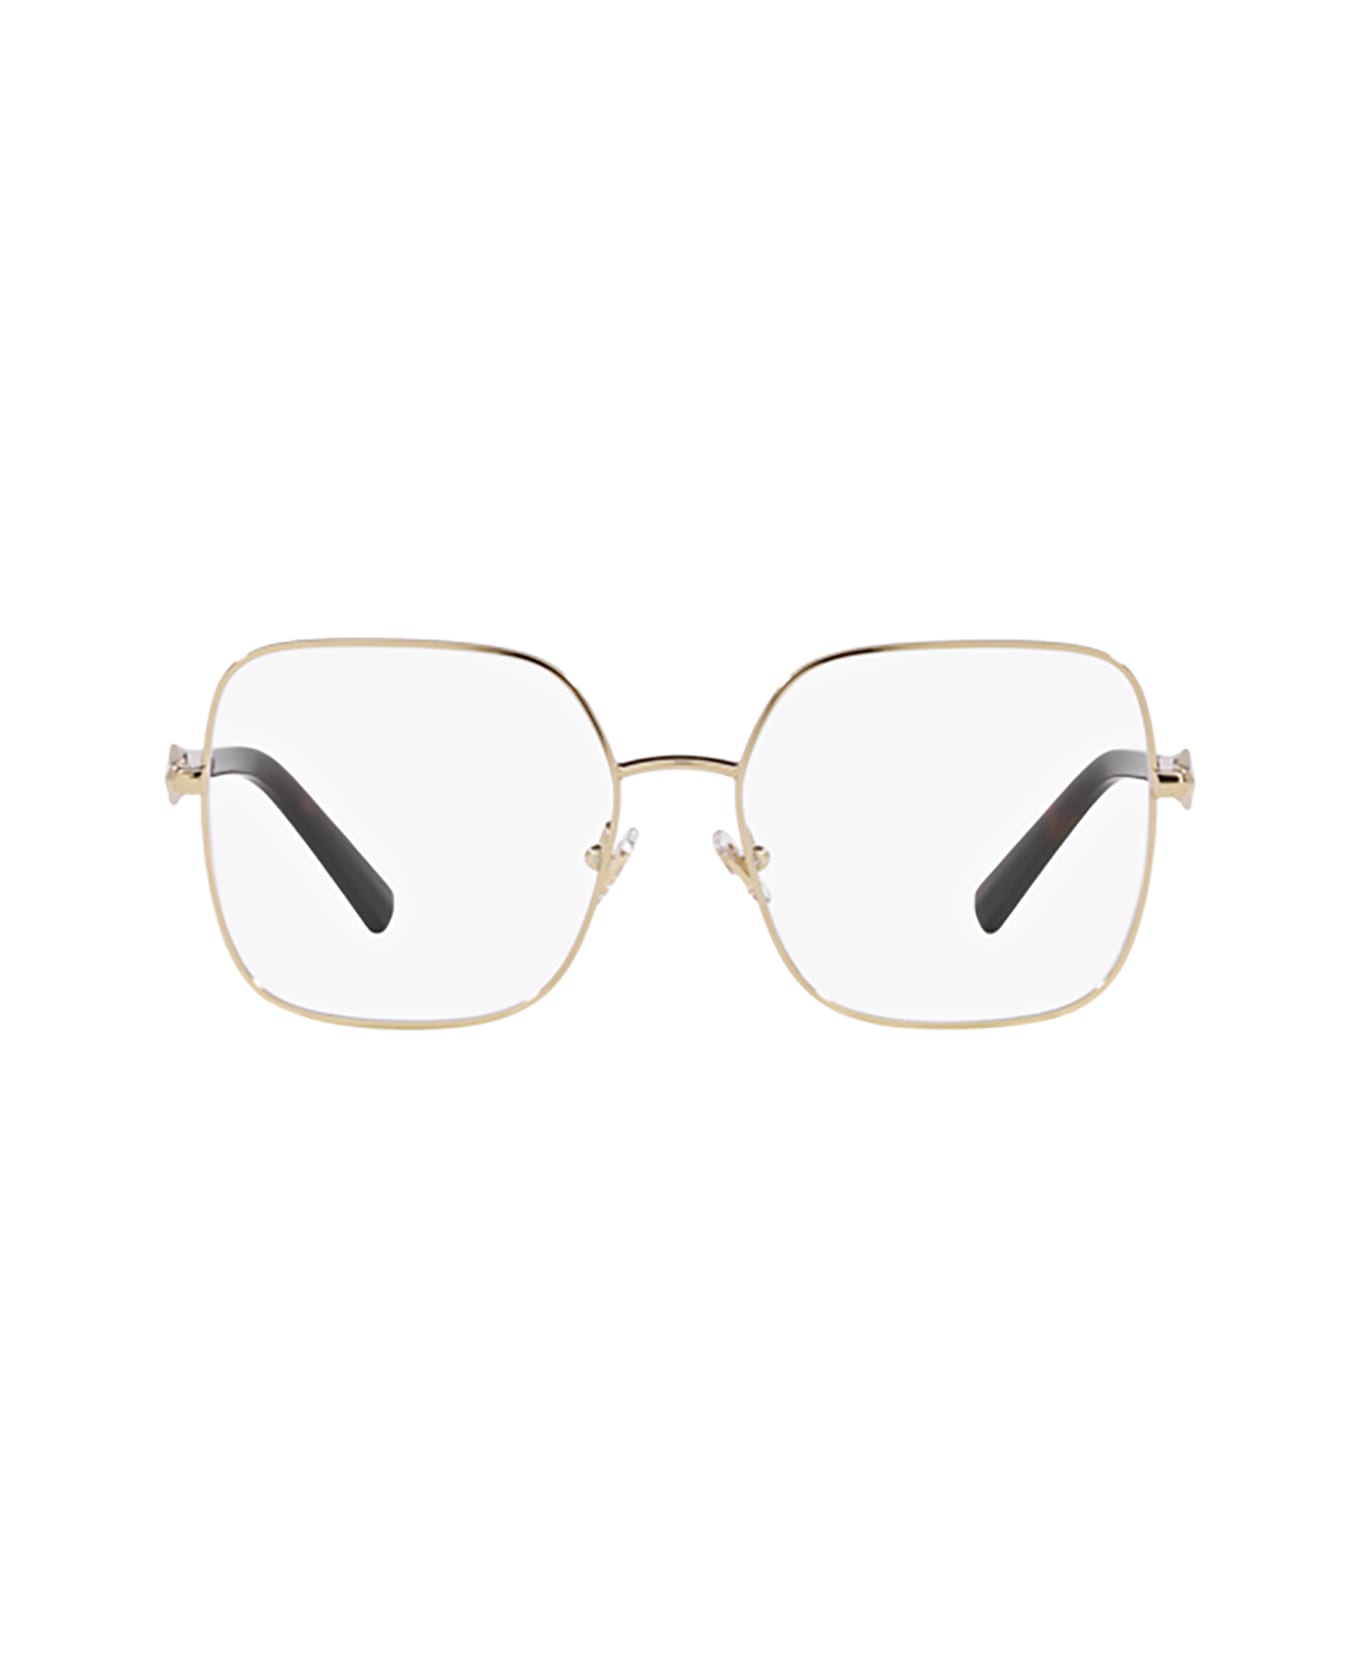 Tiffany & Co. Tf1151 Pale Gold Glasses - Pale Gold